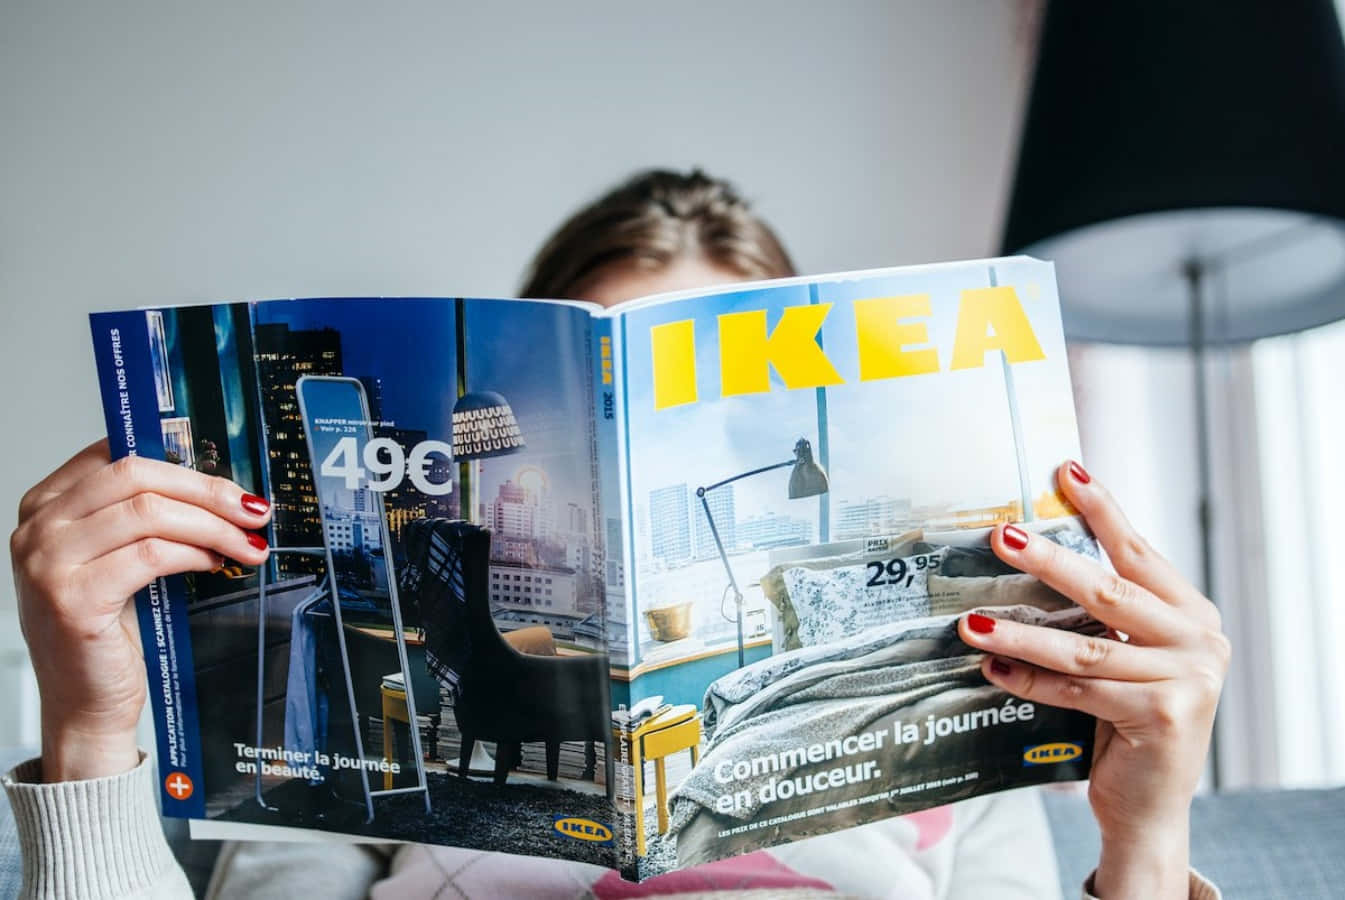 A Woman Is Reading A Magazine About Ikea